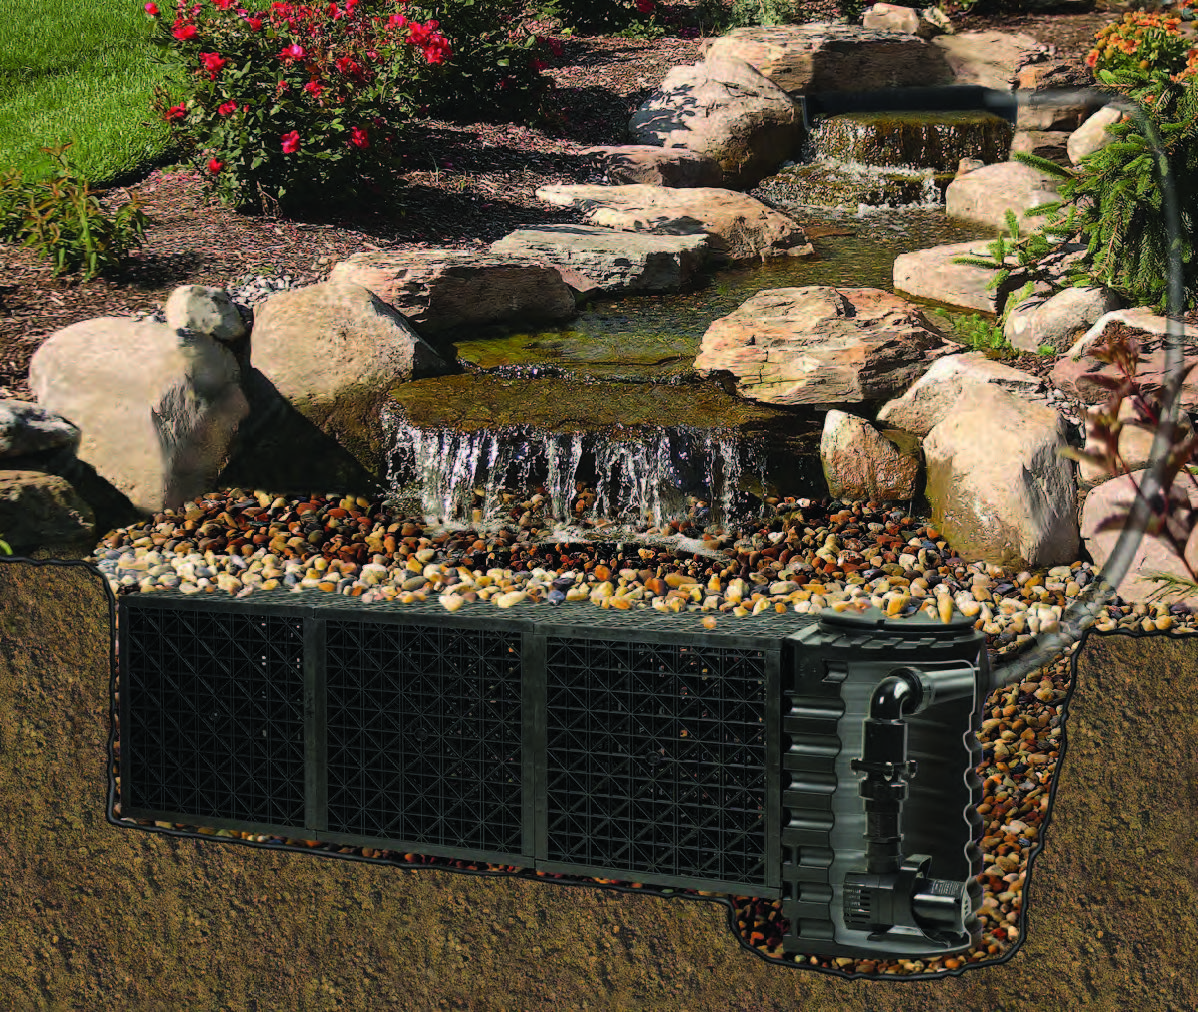 POND-FREE SYSTEMS